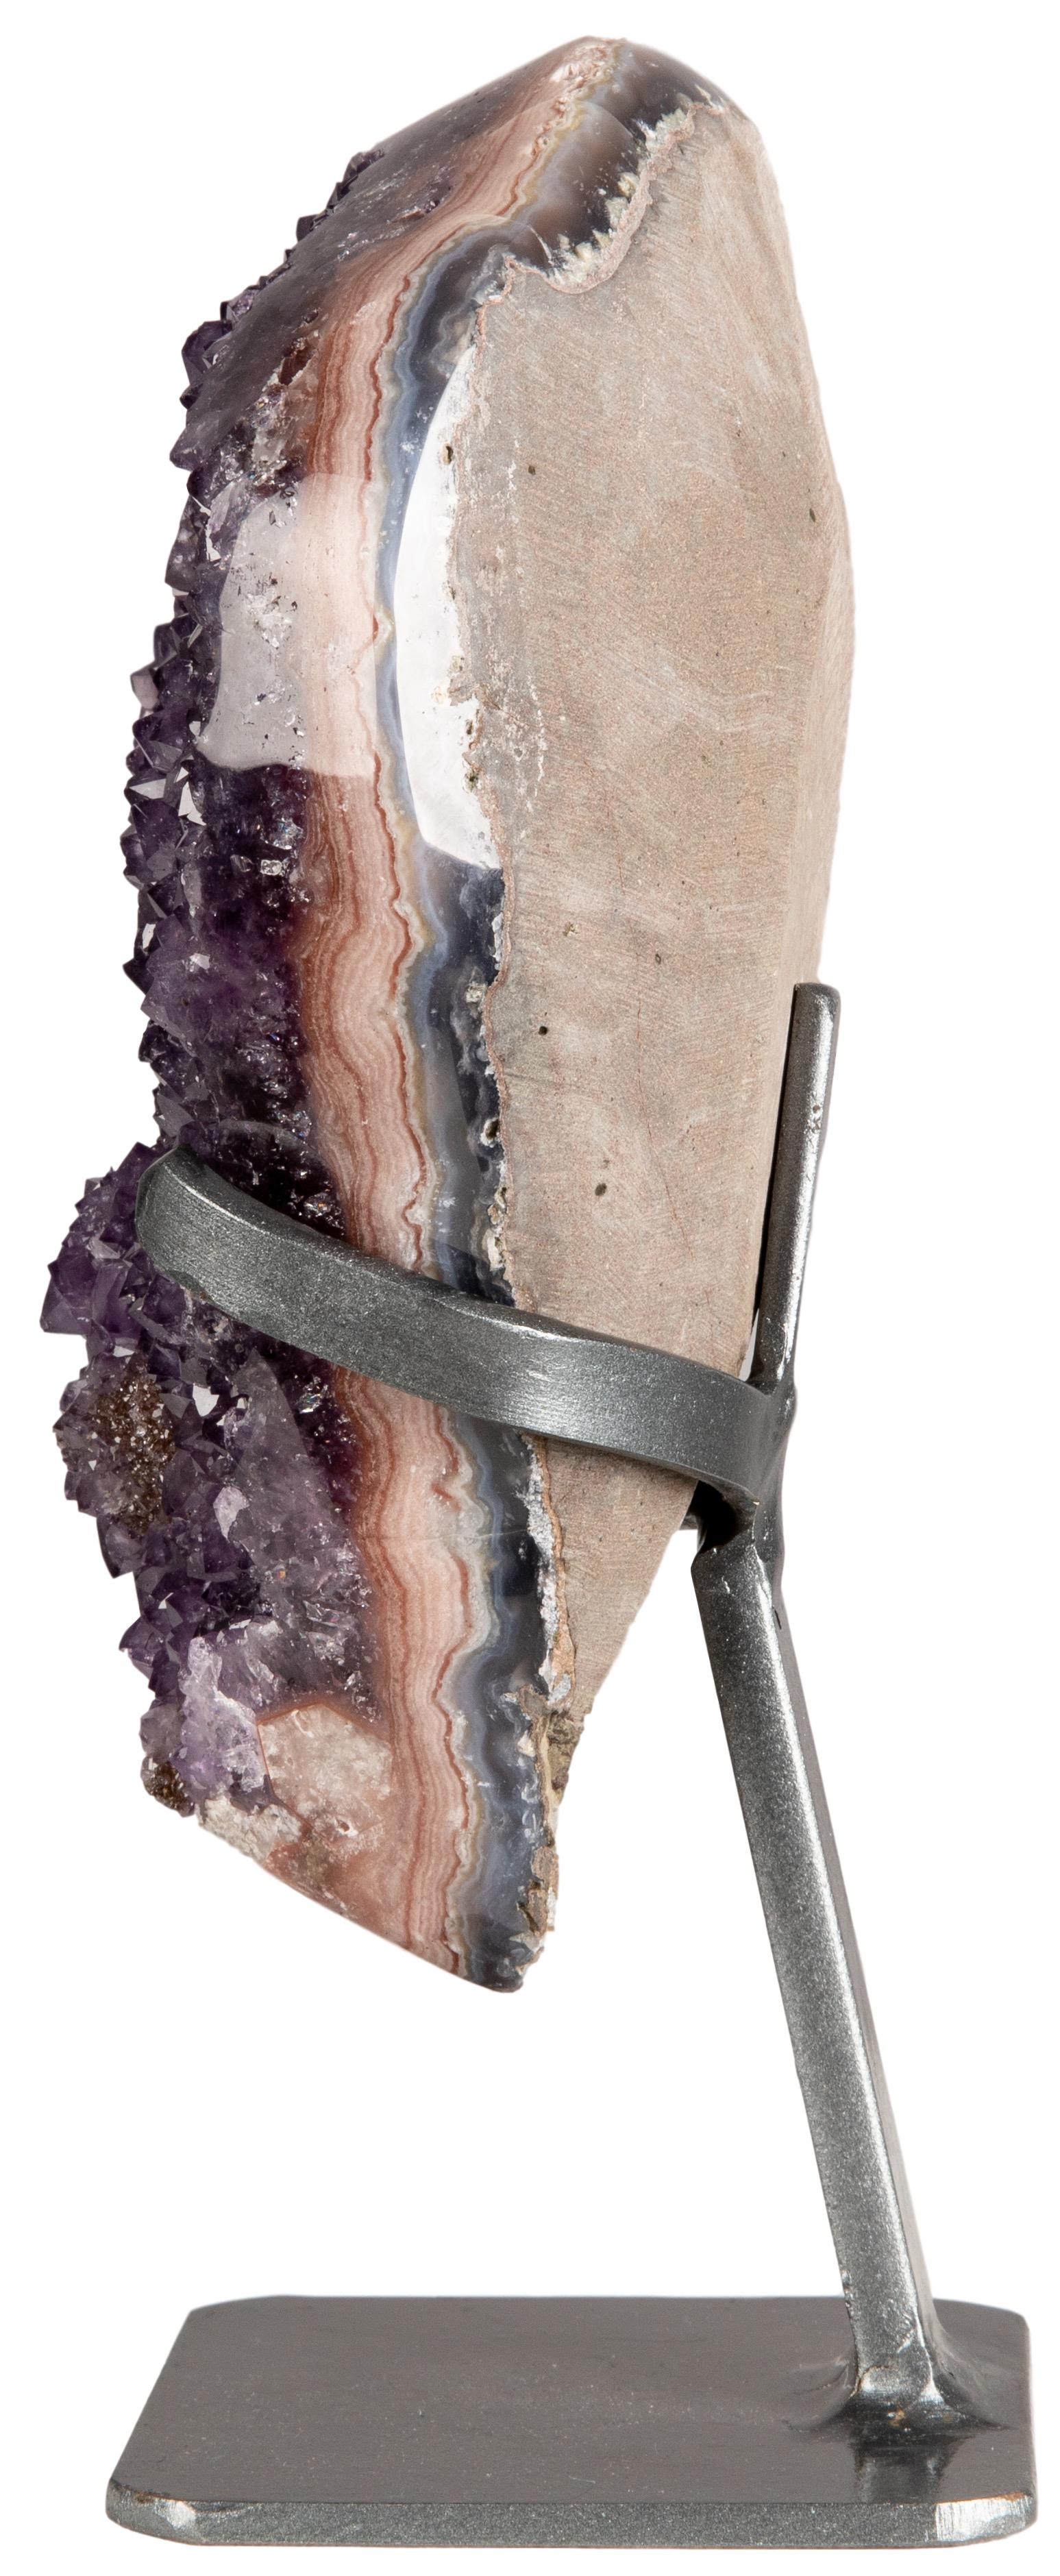 An exquisite deep purple amethyst cluster with mineral formation and a polished stalactite. This natural piece is surrounded and adorned with a beautiful polished border, where it is possible to see the mineral layers developing from the rough